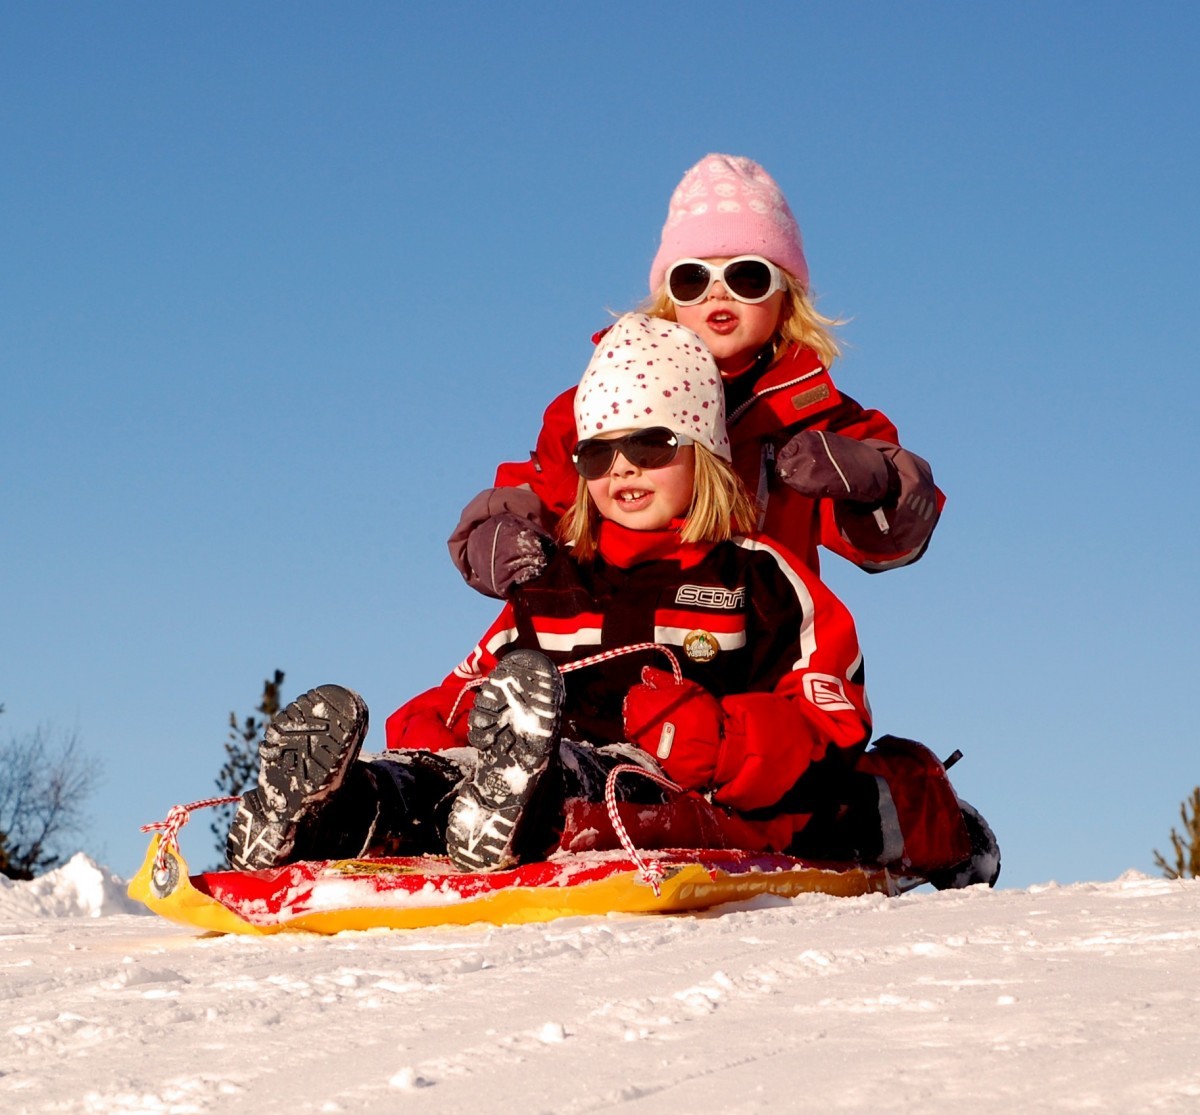 Which Winter Sport Games are best for Your Child?